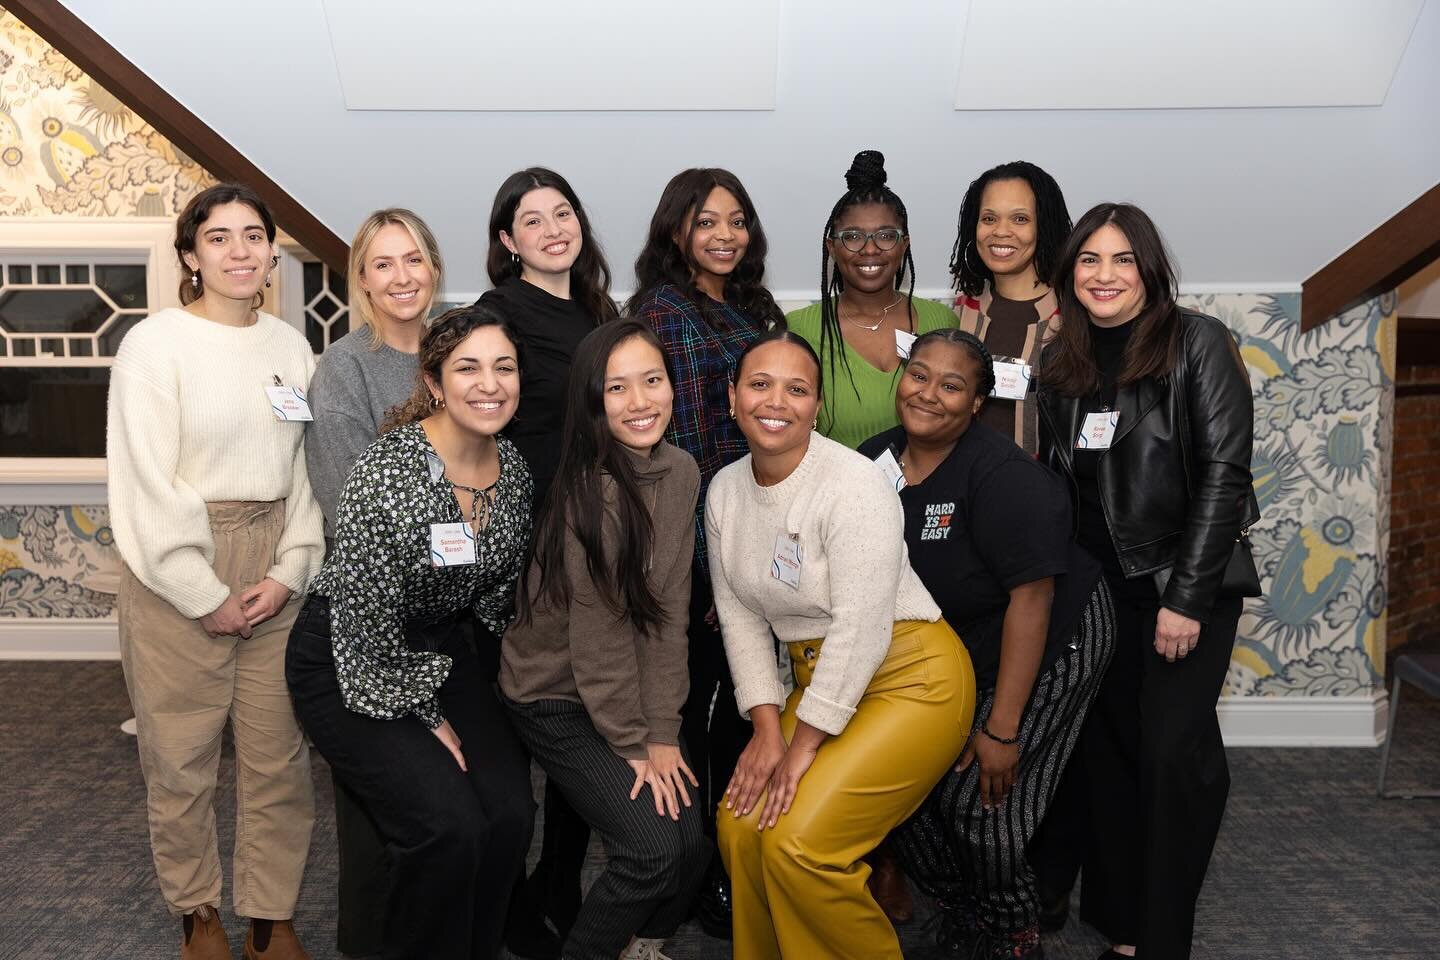 Excited to announce I was selected as a fellow for Bas Blue&rsquo;s entrepreneur fellowship for women! Looking forward to learning with this cohort and continuing to grow JB&rsquo;s Ice Pops.